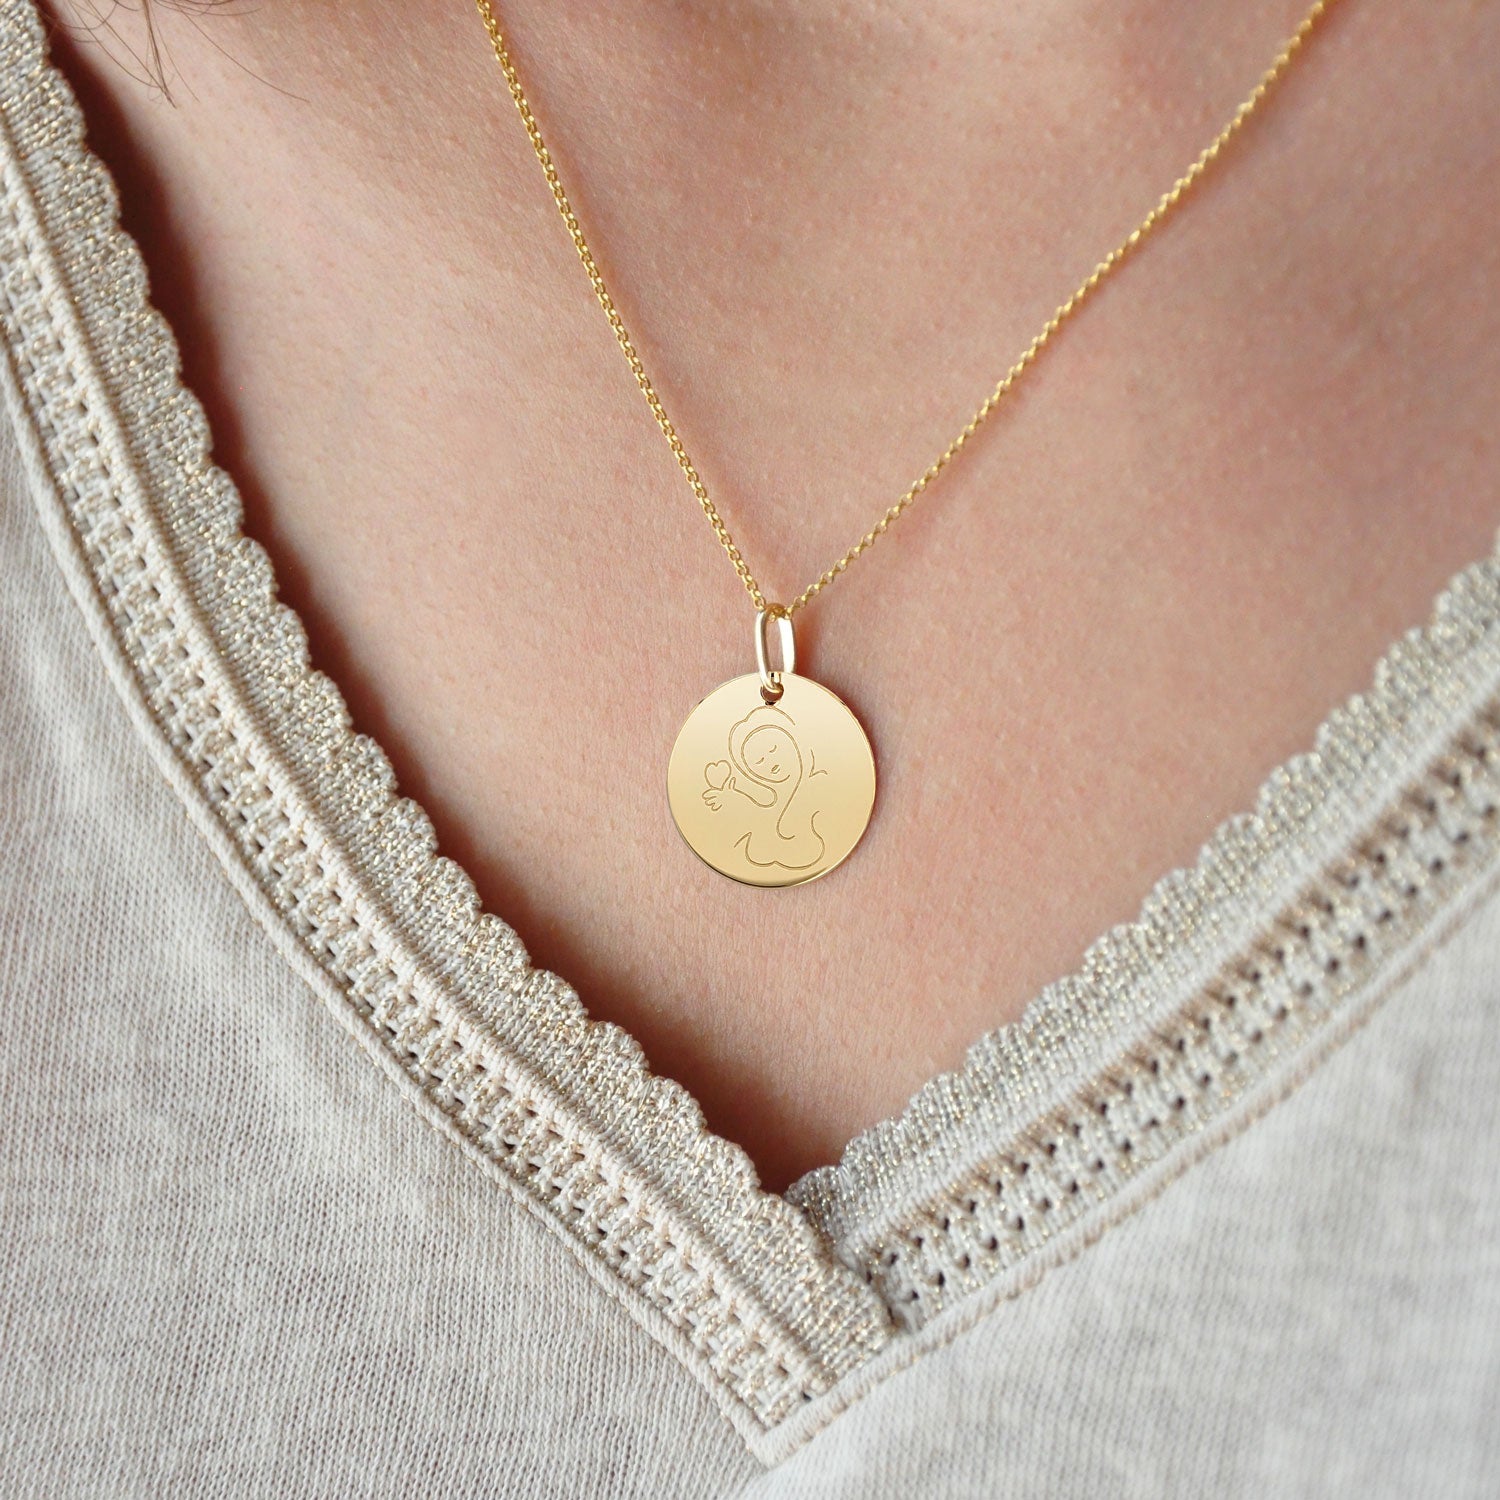 Muze 18k gold vermeil love medal necklace, art inspired jewelry, dainty talisman symbol of love, protection. Meaningful sentimental gift perfect for mother, daughter or girlfriend.